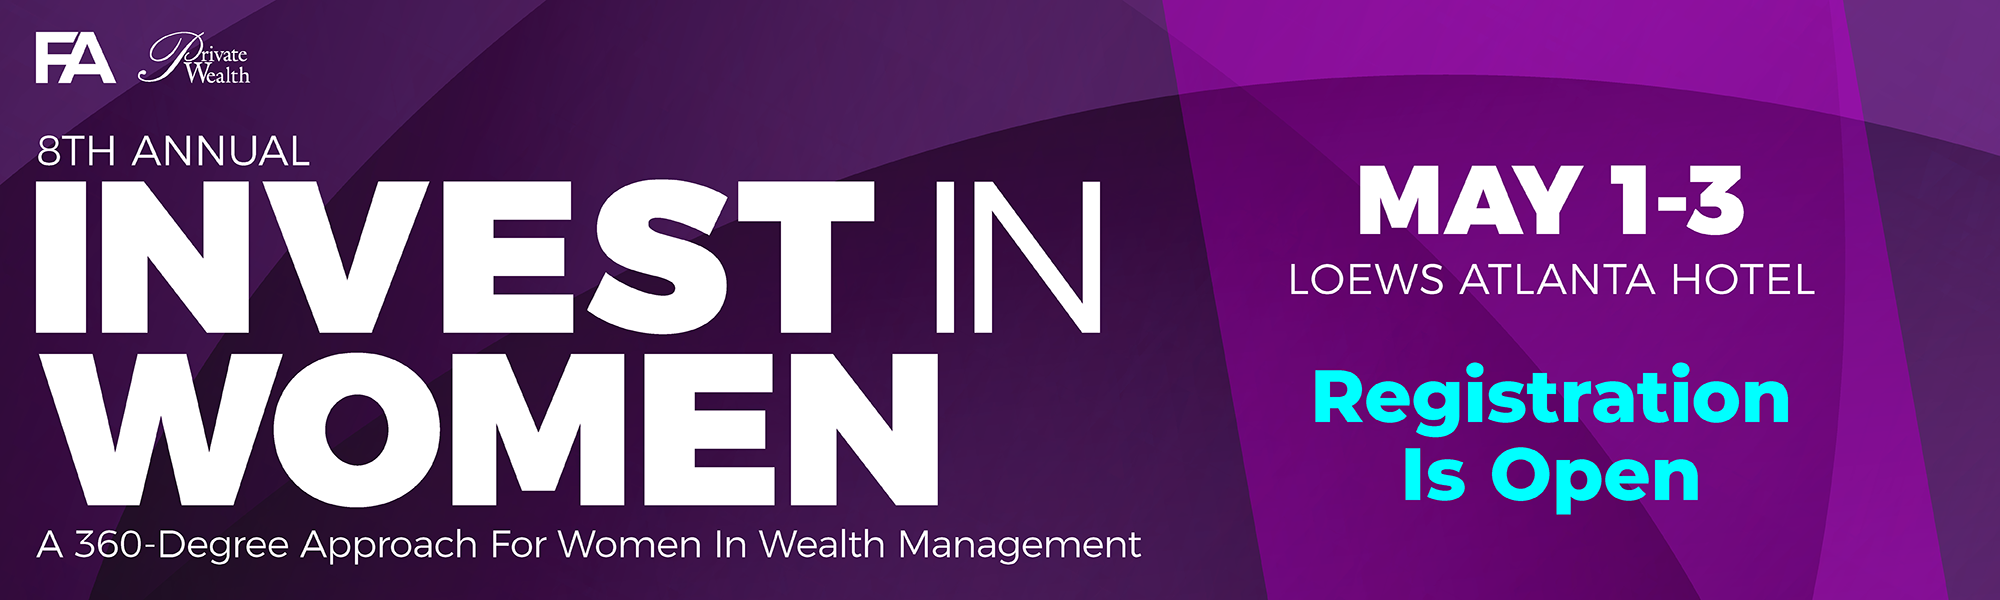 8th Annual Invest In Women